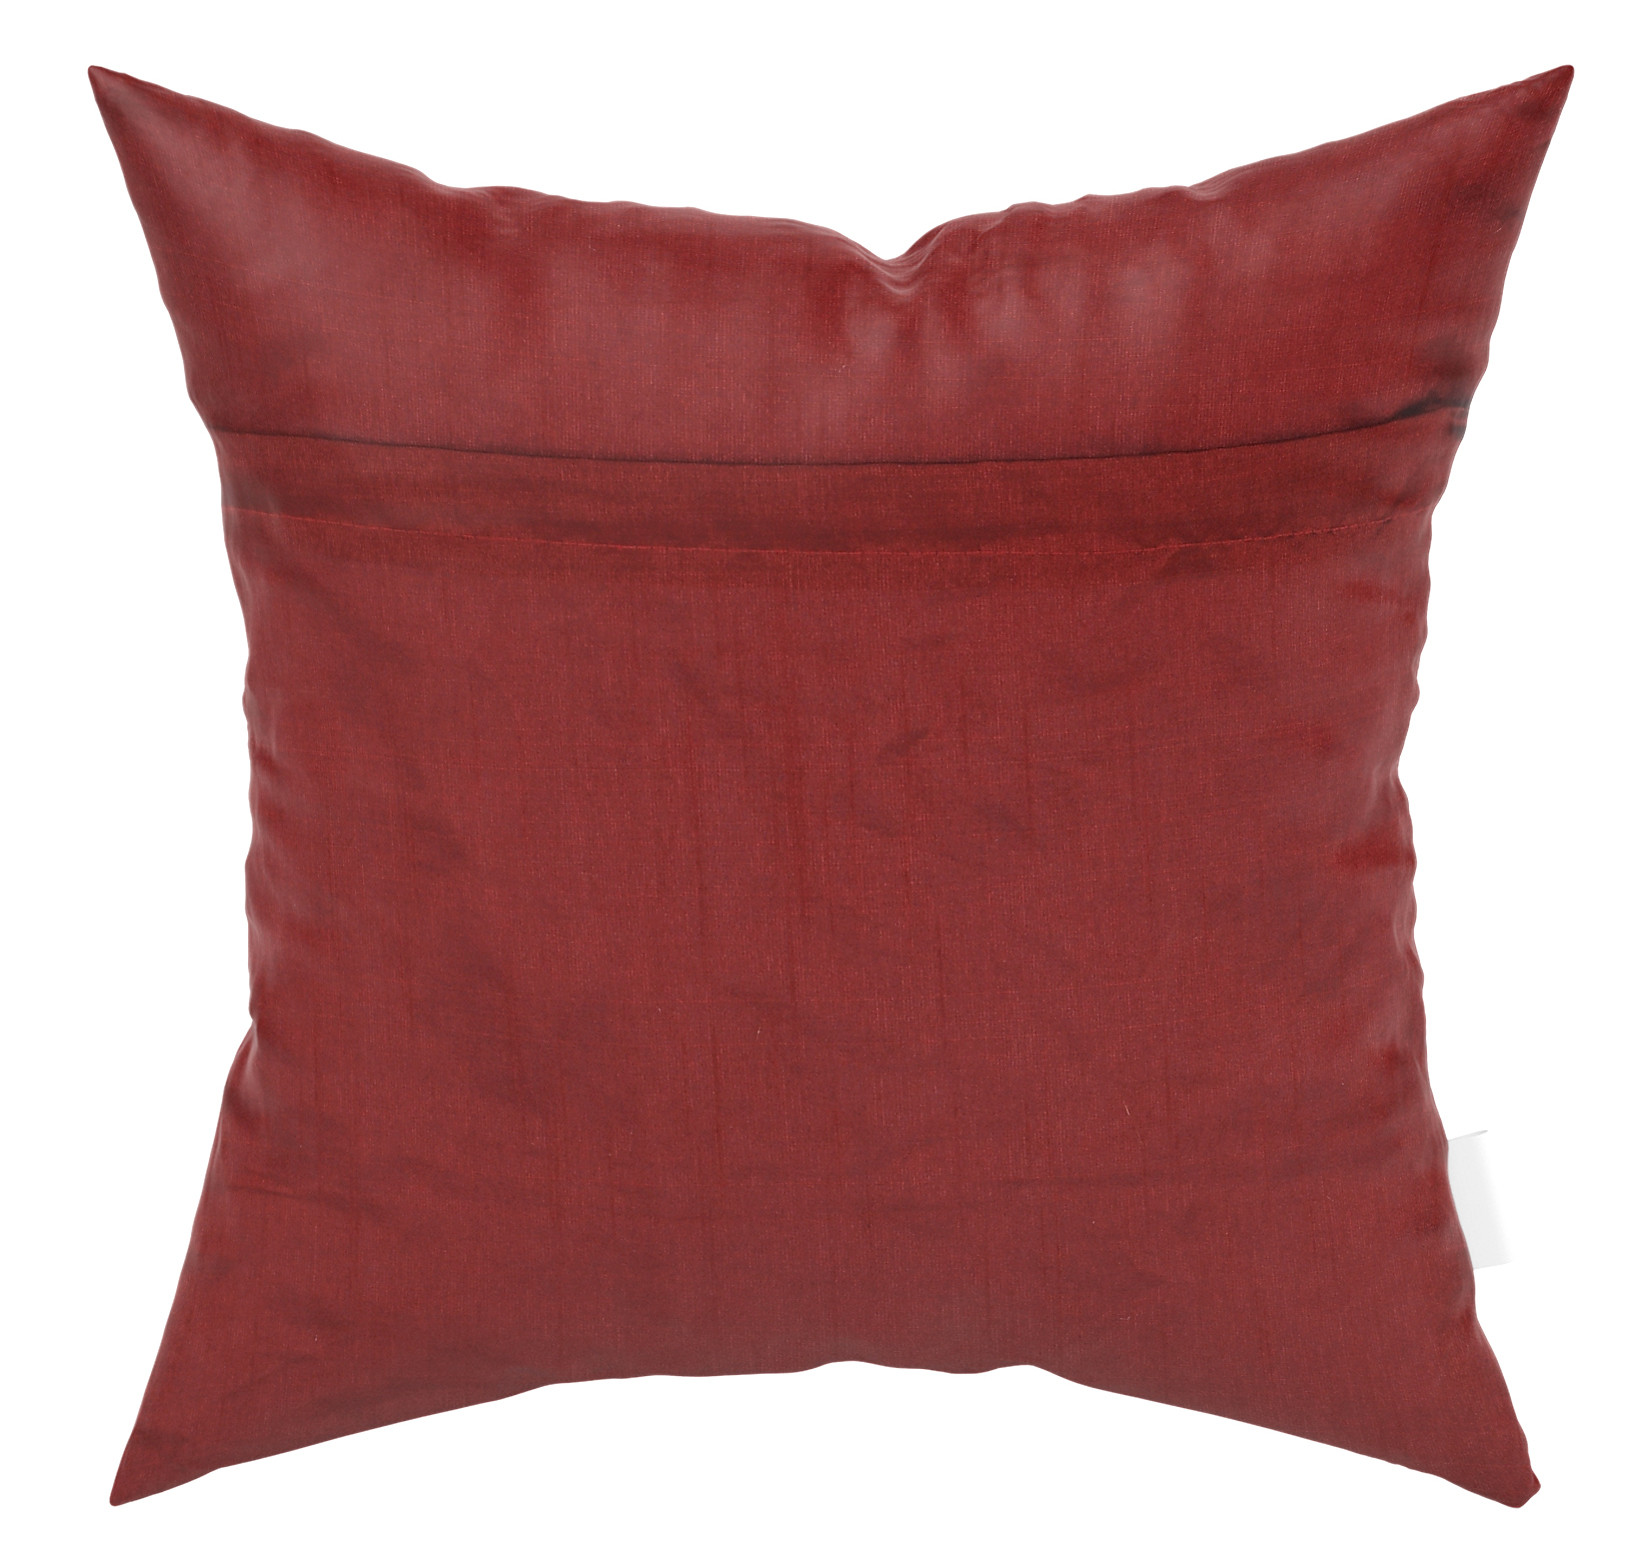 Kuber Industries Velvet Floral Design Soft Decorative Square Throw Pillow Cover, Cushion Covers, Pillow Case For Sofa Couch Bed Chair 16x16 Inch- (Maroon)